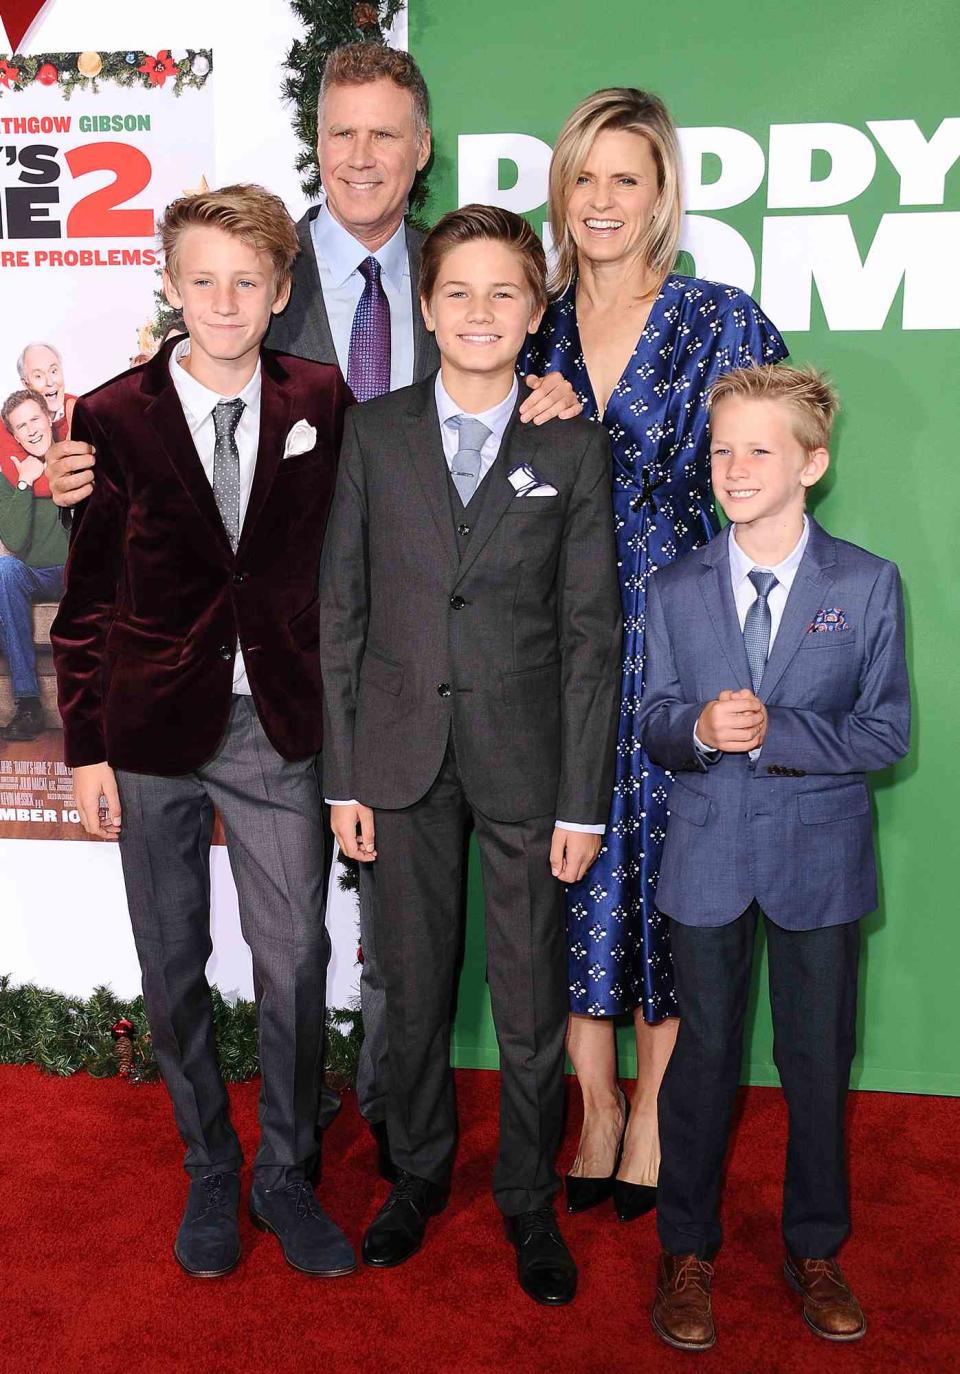 Will Ferrell, wife Viveca Paulin and children Magnus Paulin Ferrell, Mattias Paulin Ferrell and Axel Paulin Ferrell attend the premiere of "Daddy's Home 2" at Regency Village Theatre on November 5, 2017 in Westwood, California